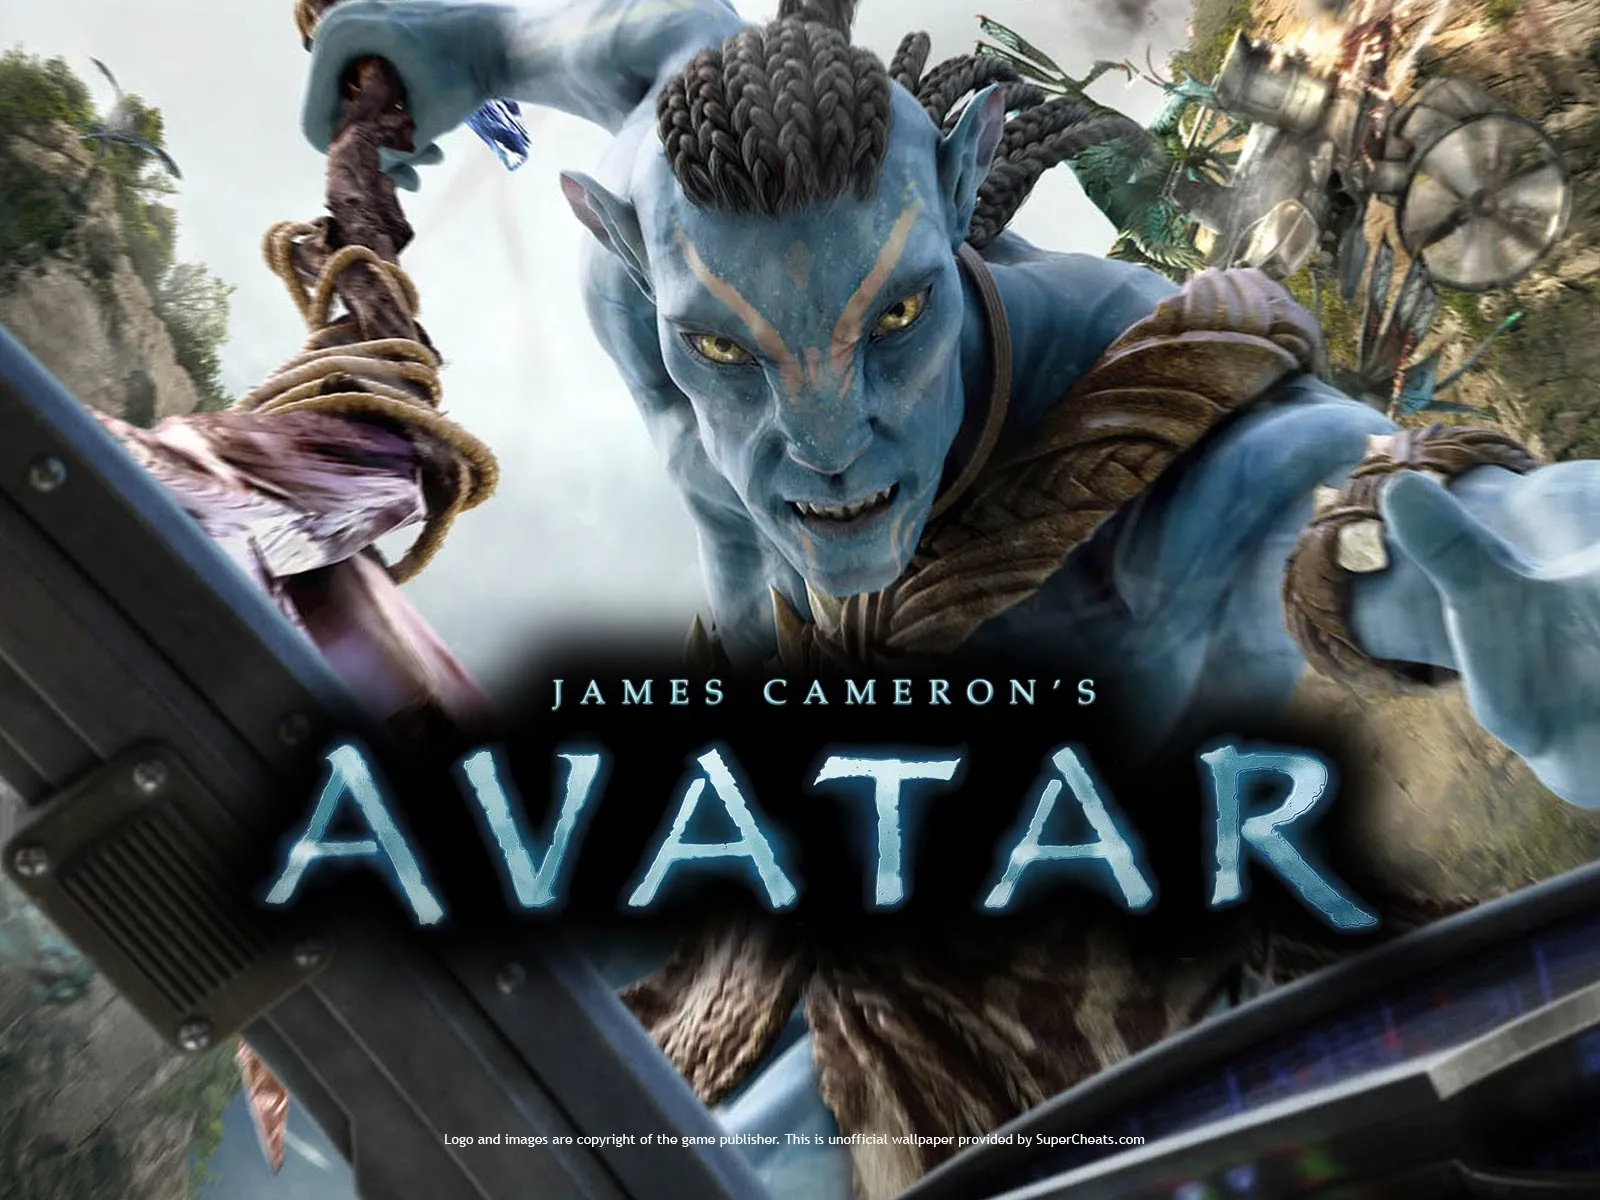 James Camerons Avatar The Game System requirements For PC   systemrequirementsforpc